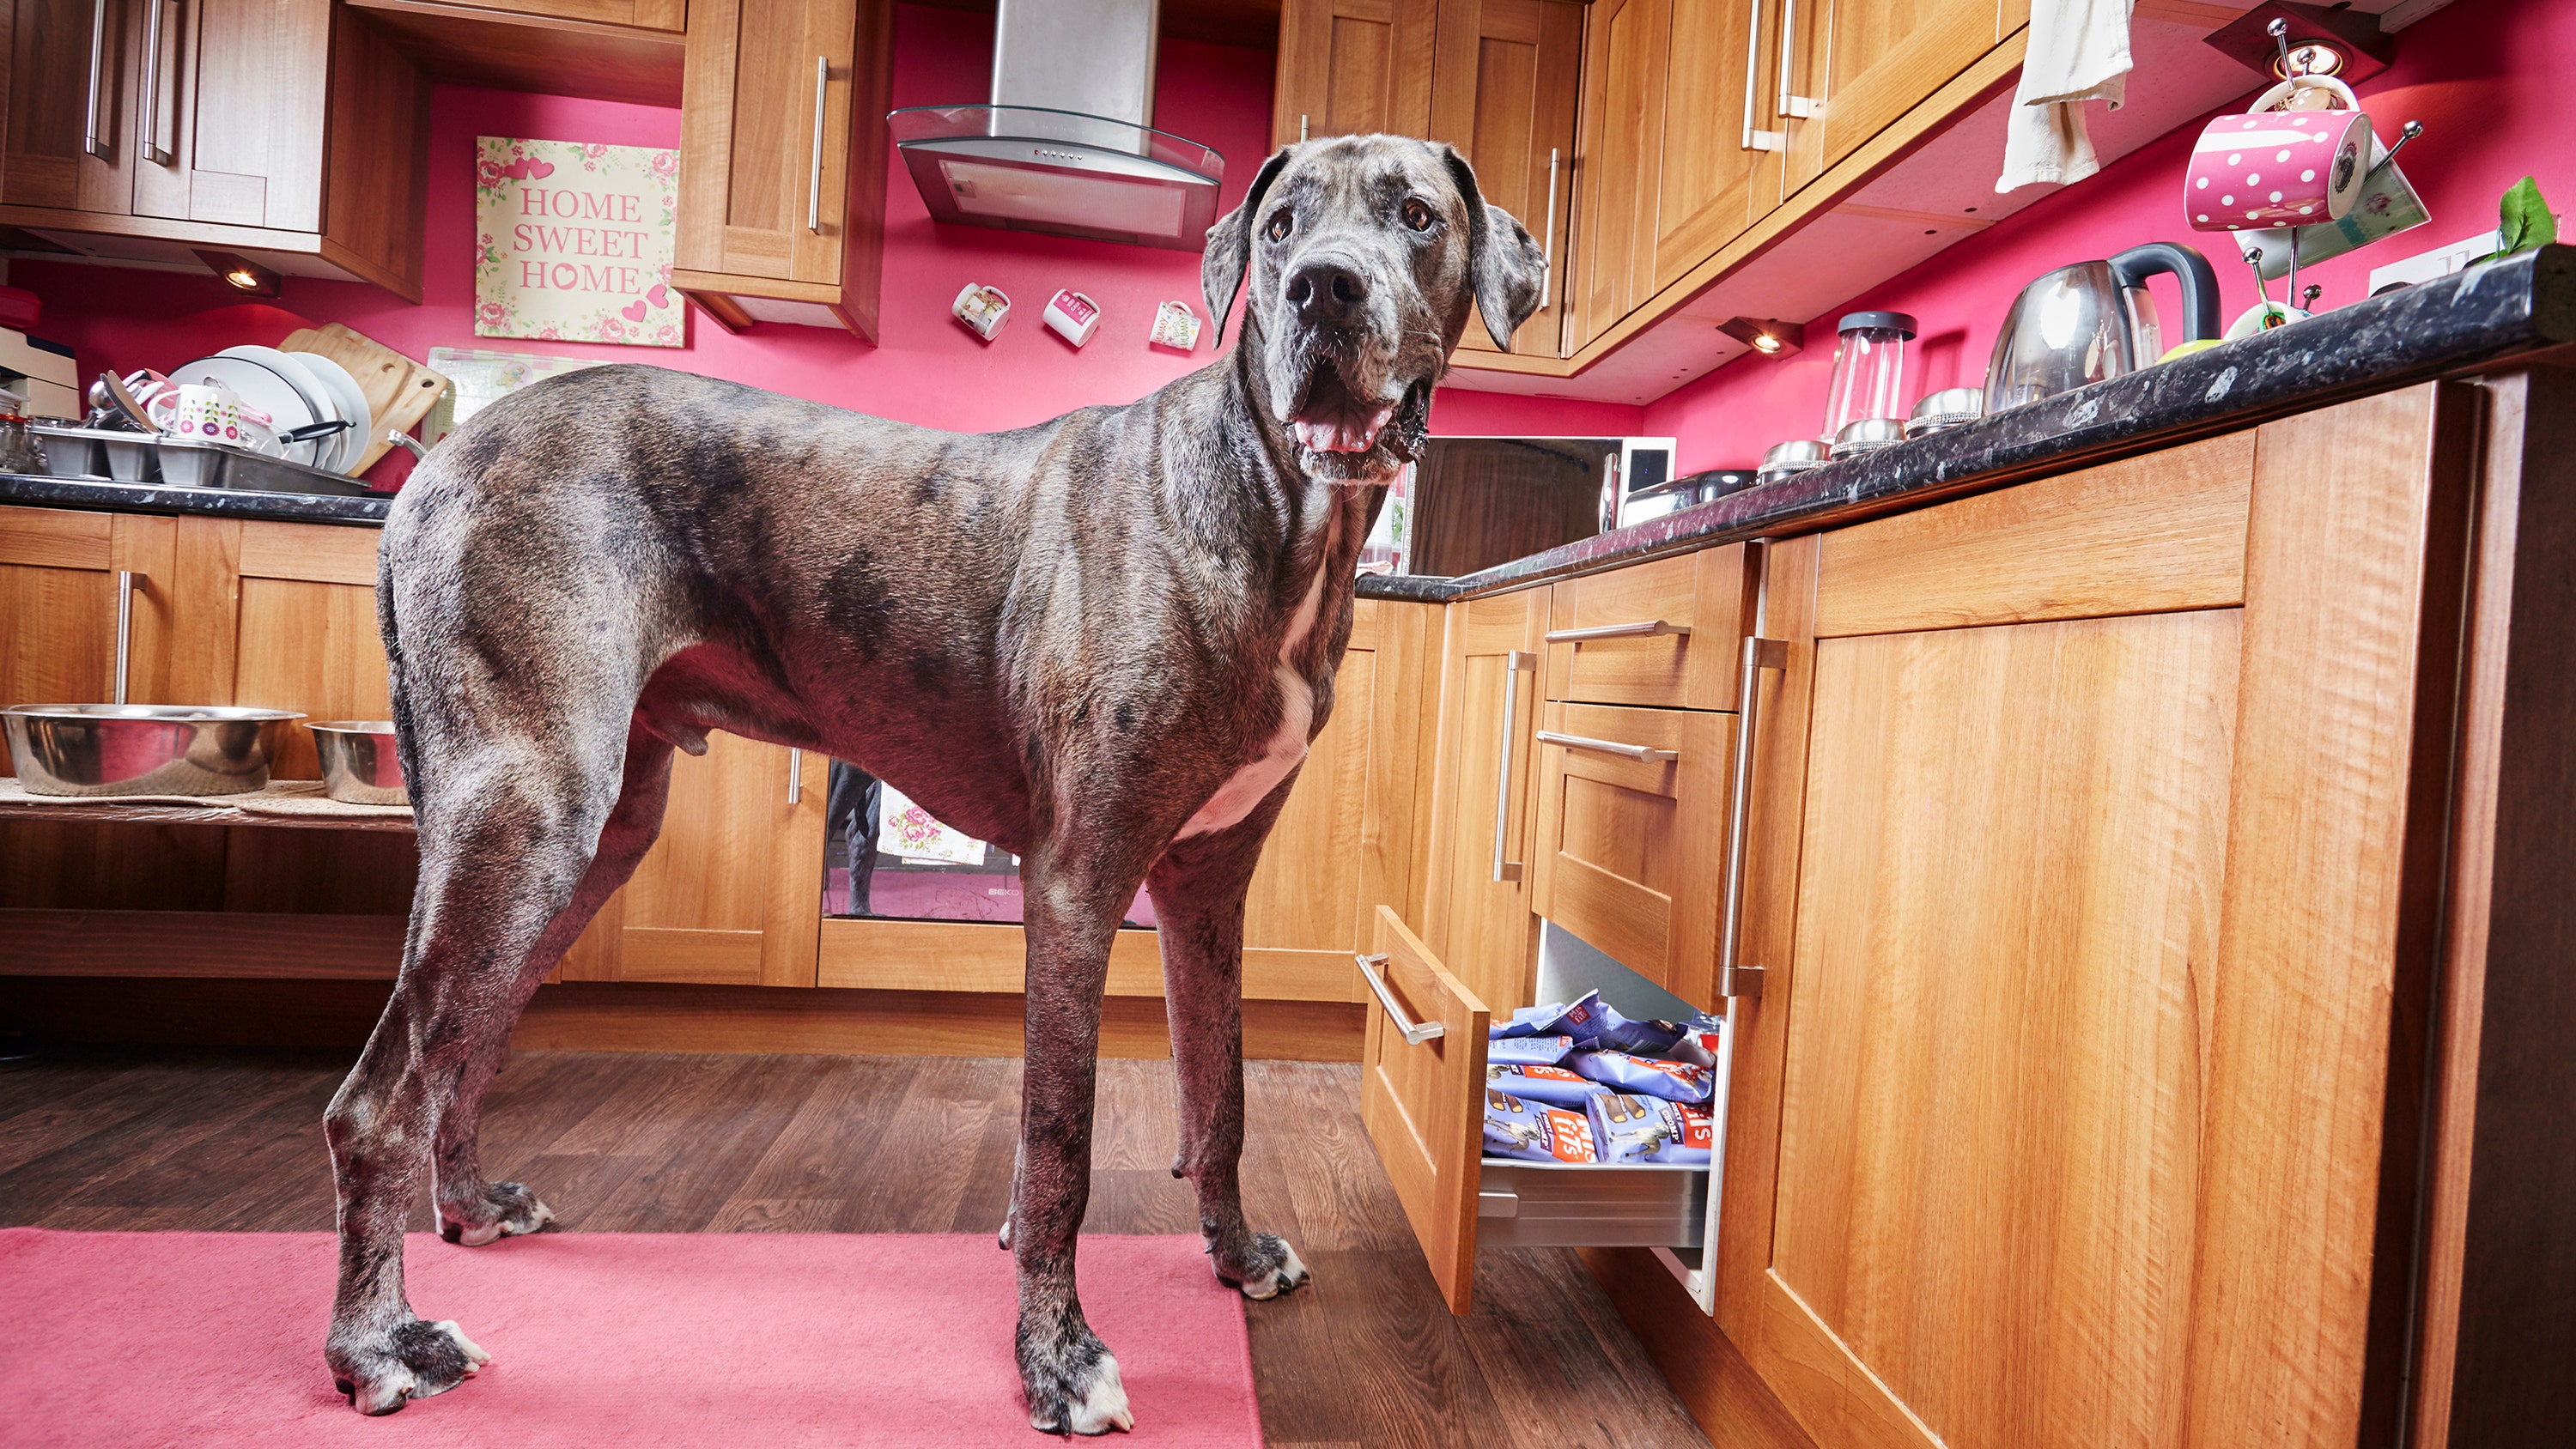 The largest dog in the world, the 8-year-old Great Dane, dies